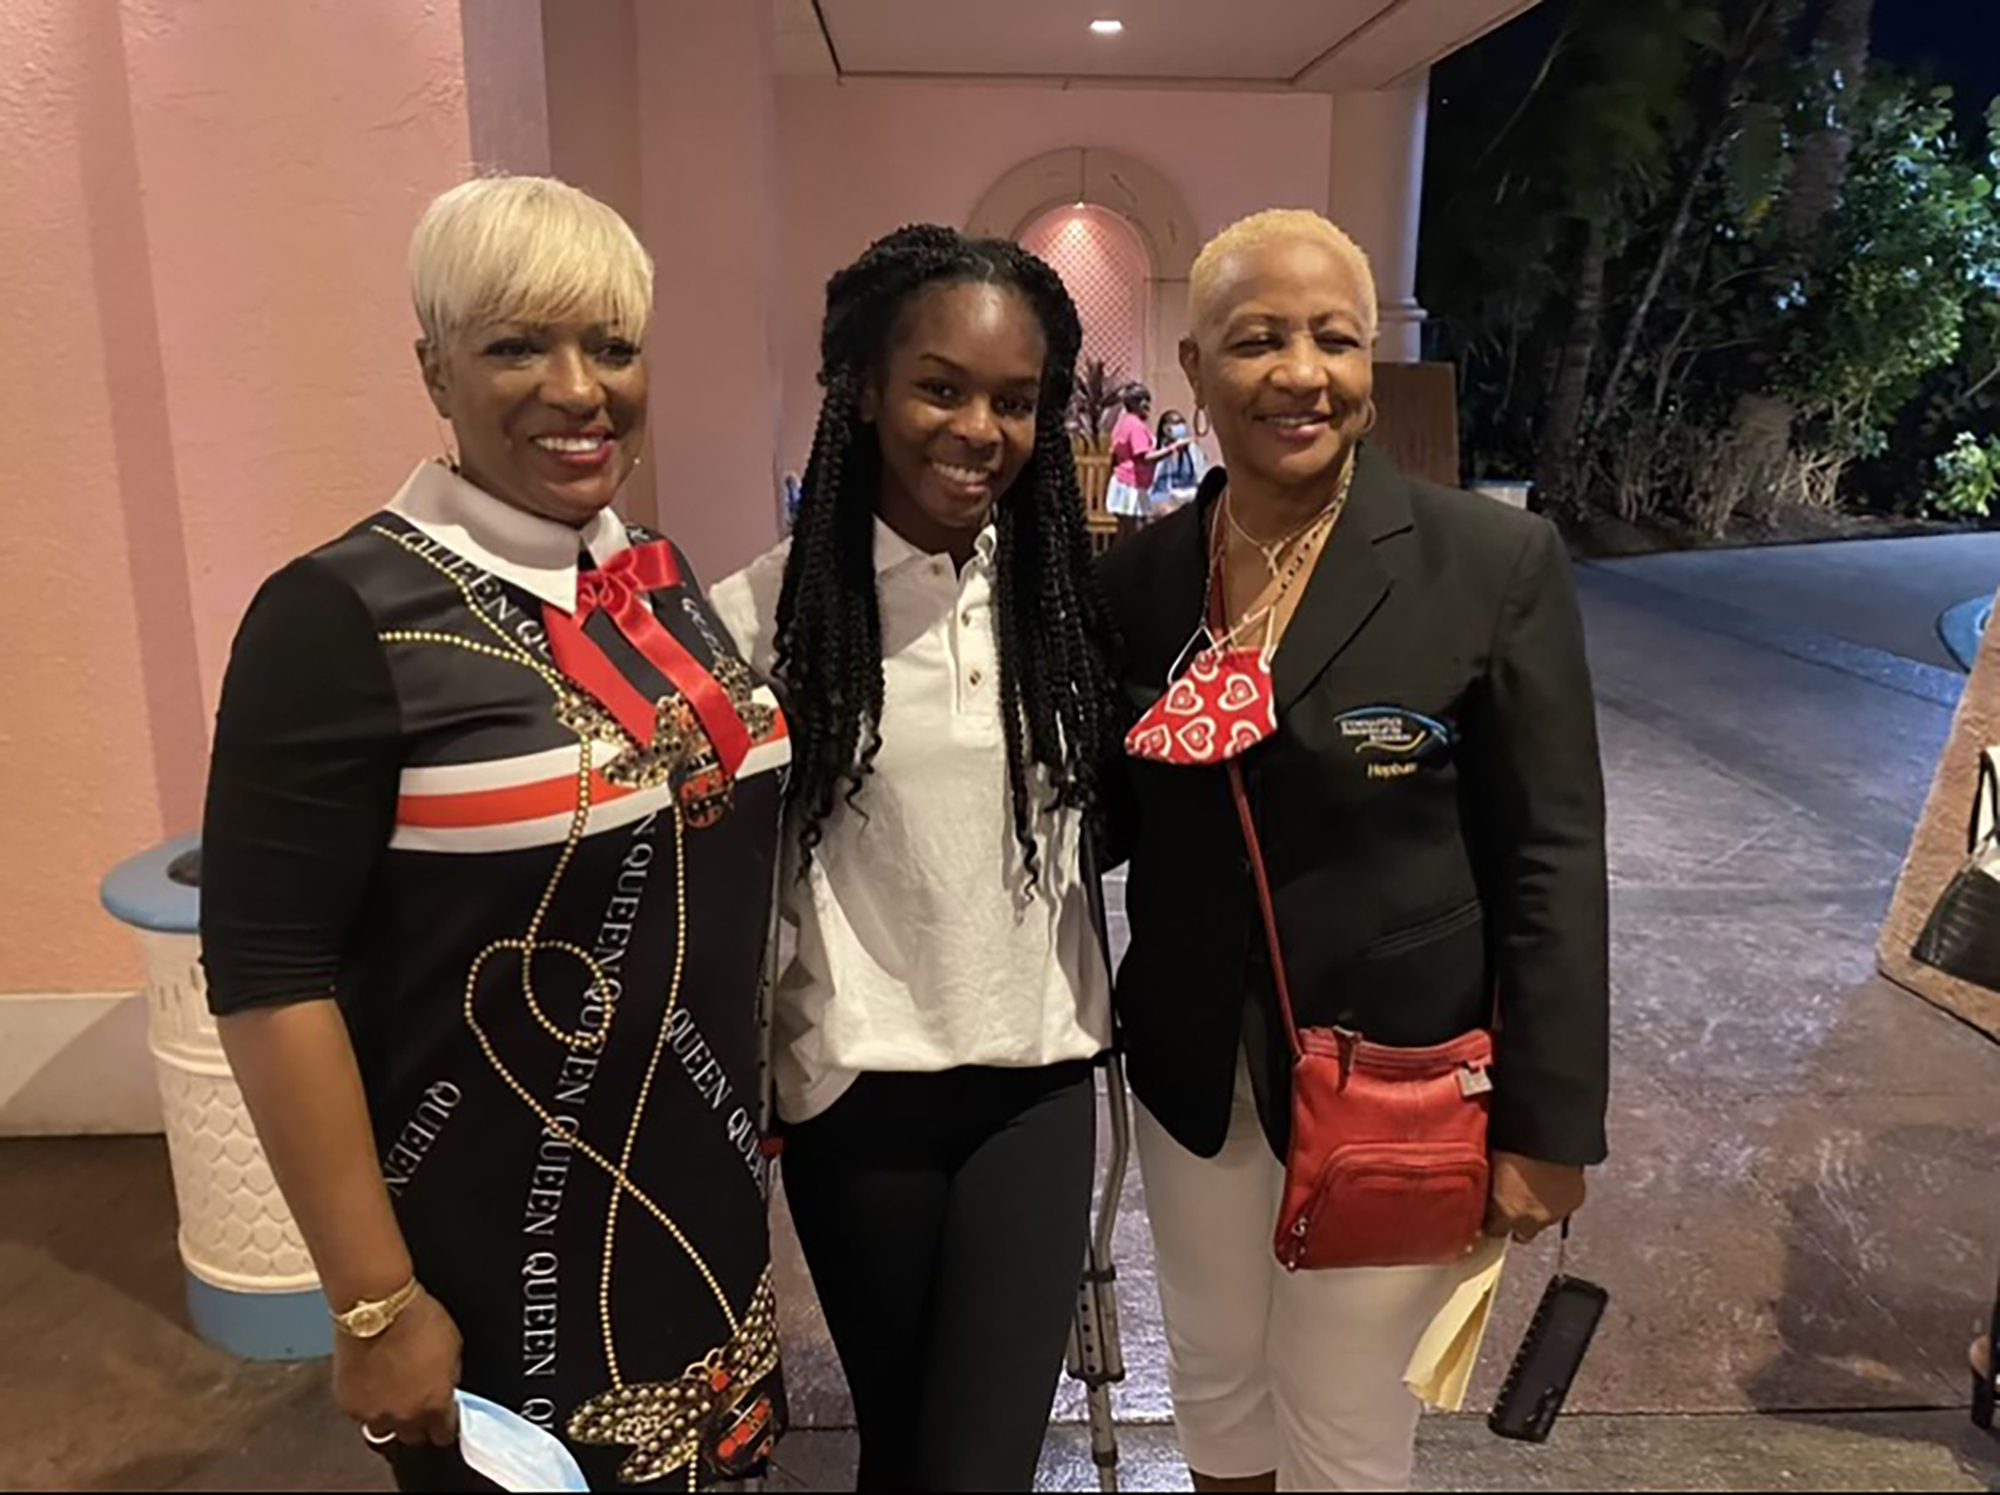 Eldece Clarke, the tourism sports director of the Bahamas Ministry of Tourism, and Cora Hepburn, the president of the Bahamas Gymnastics Federation, work with Rhegan Duncombe (center) to support Gymnast to Gymnast. Courtesy photo.